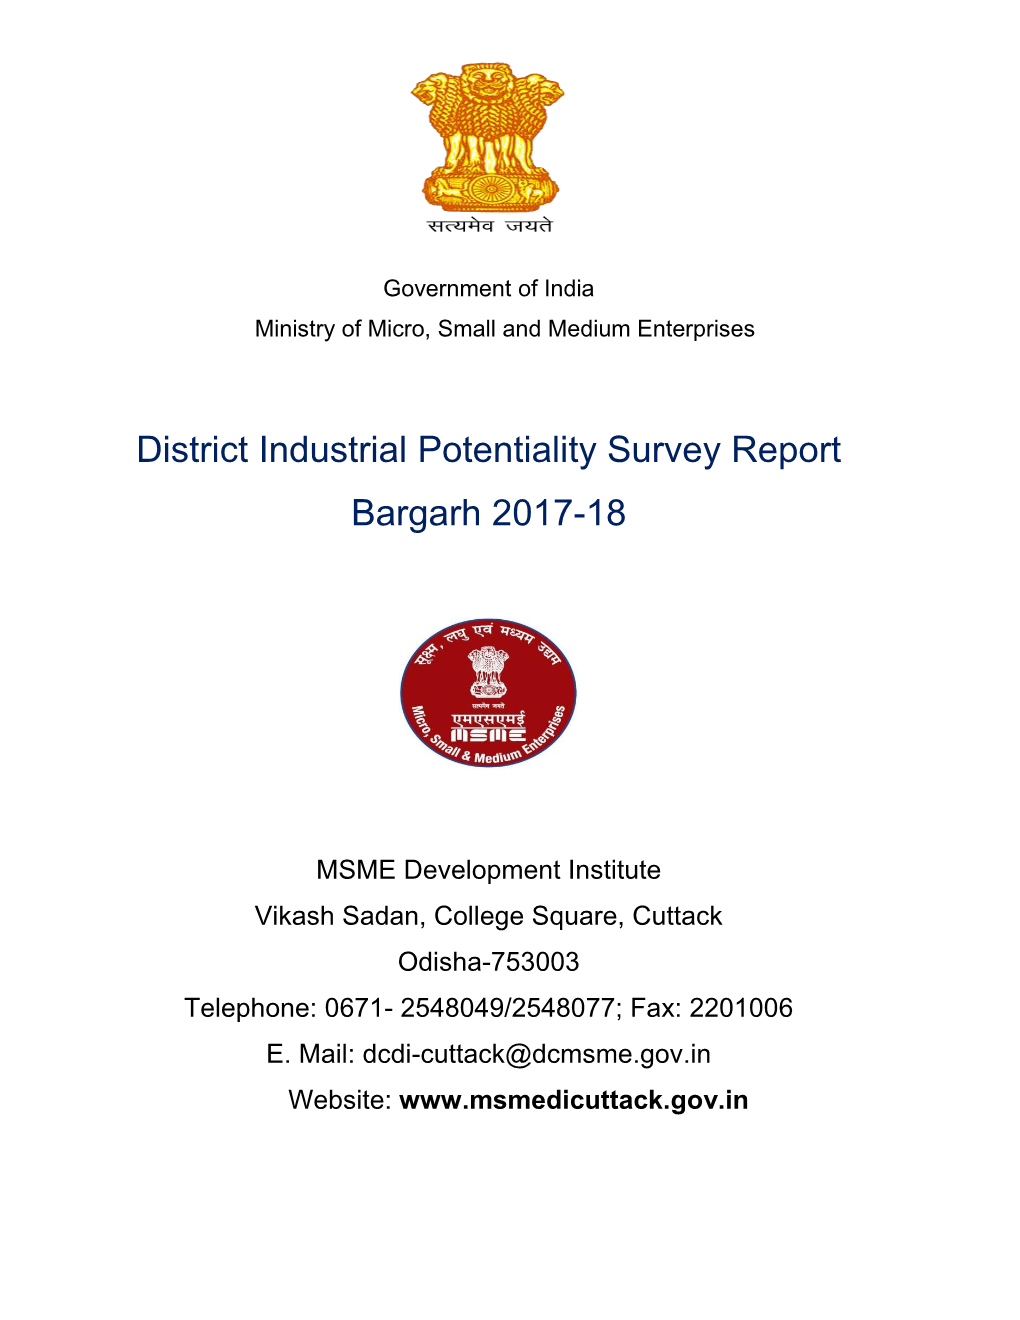 District Industrial Potentiality Survey Report Bargarh 2017-18